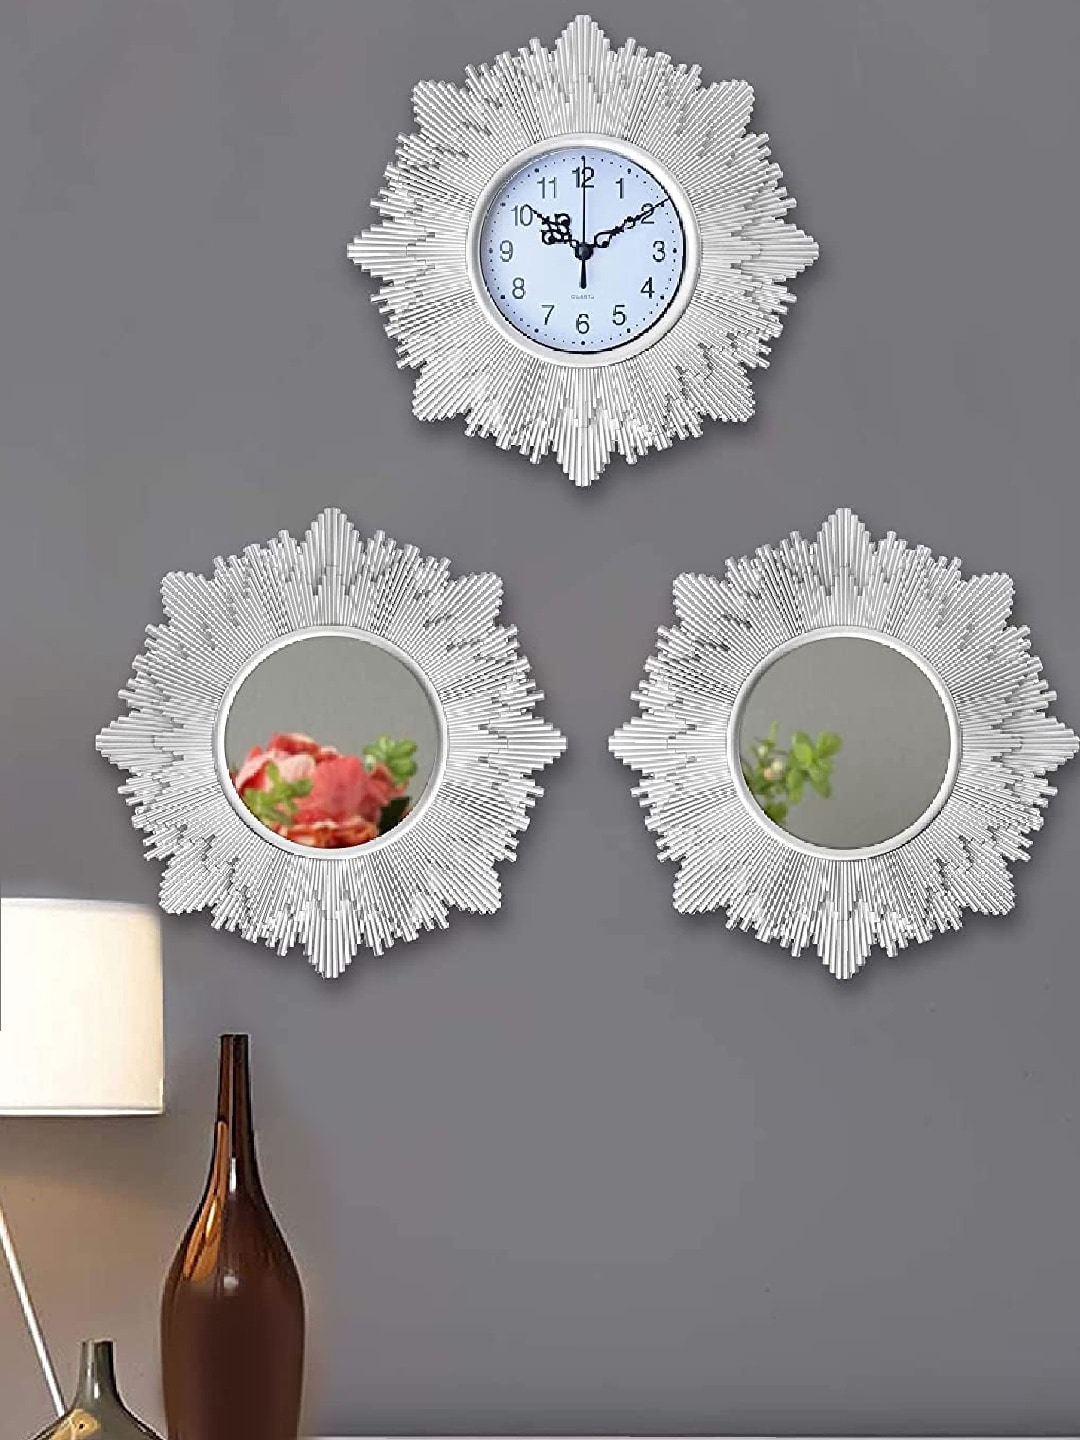 TIED RIBBONS Silver-Toned & White Set of 3 Floral Contemporary Wall Clock with Mirrors Price in India